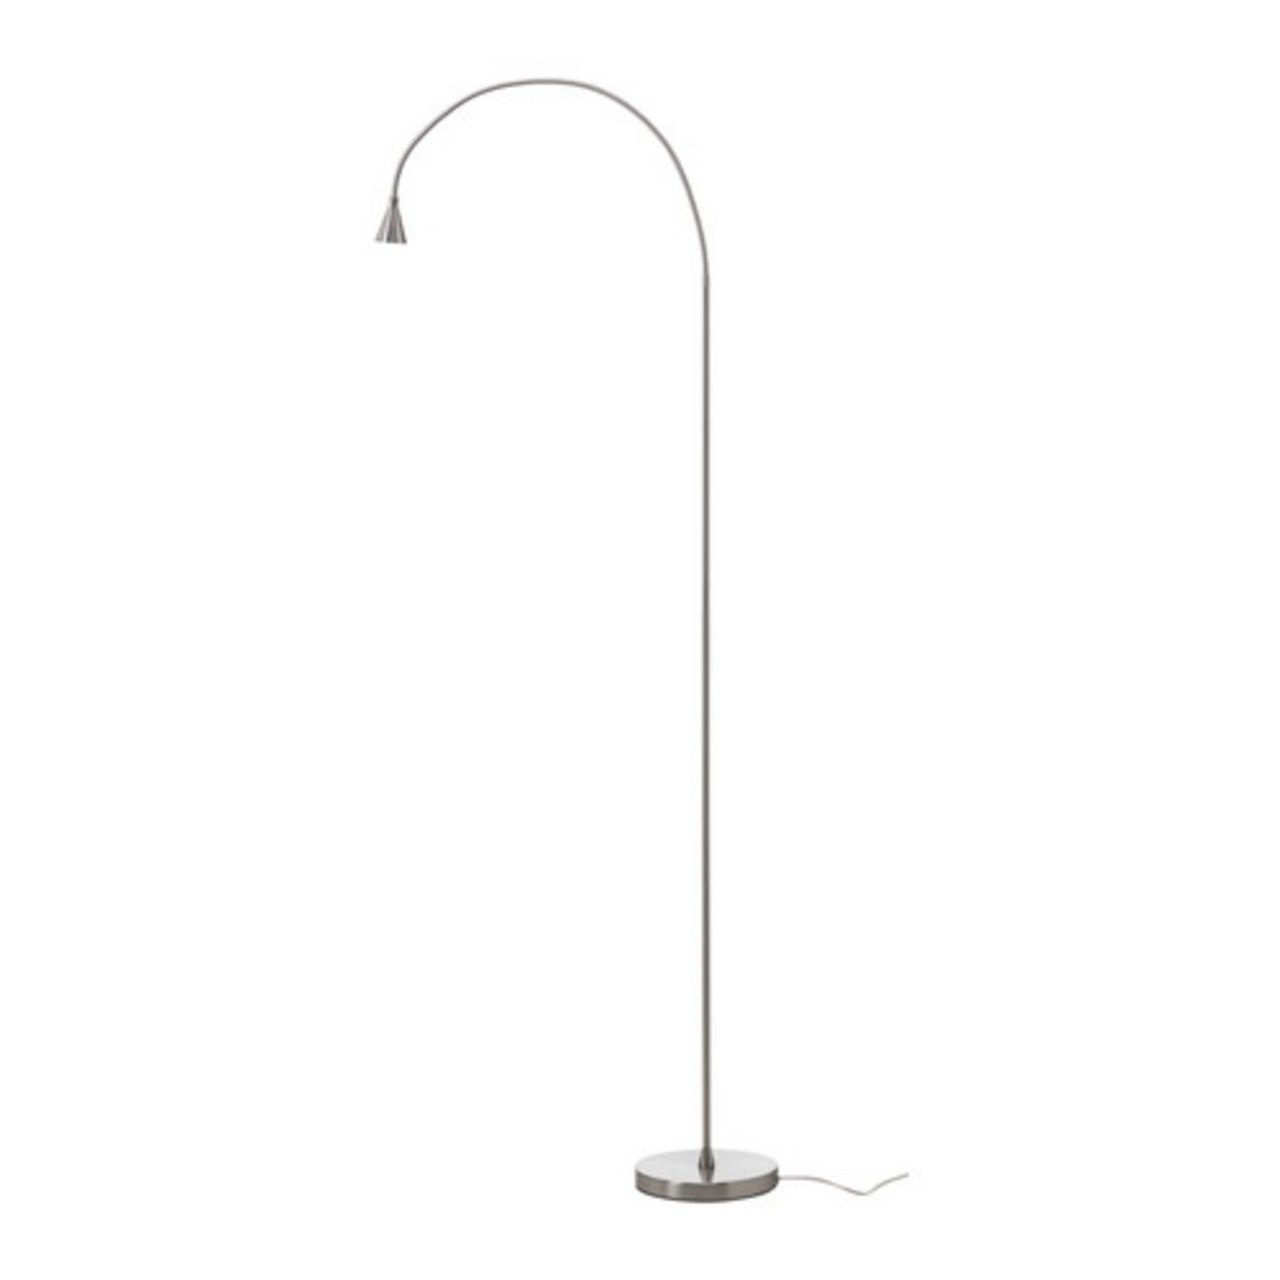 09 ceiling lights table lamps floor lamp 0222 courtesy vendor